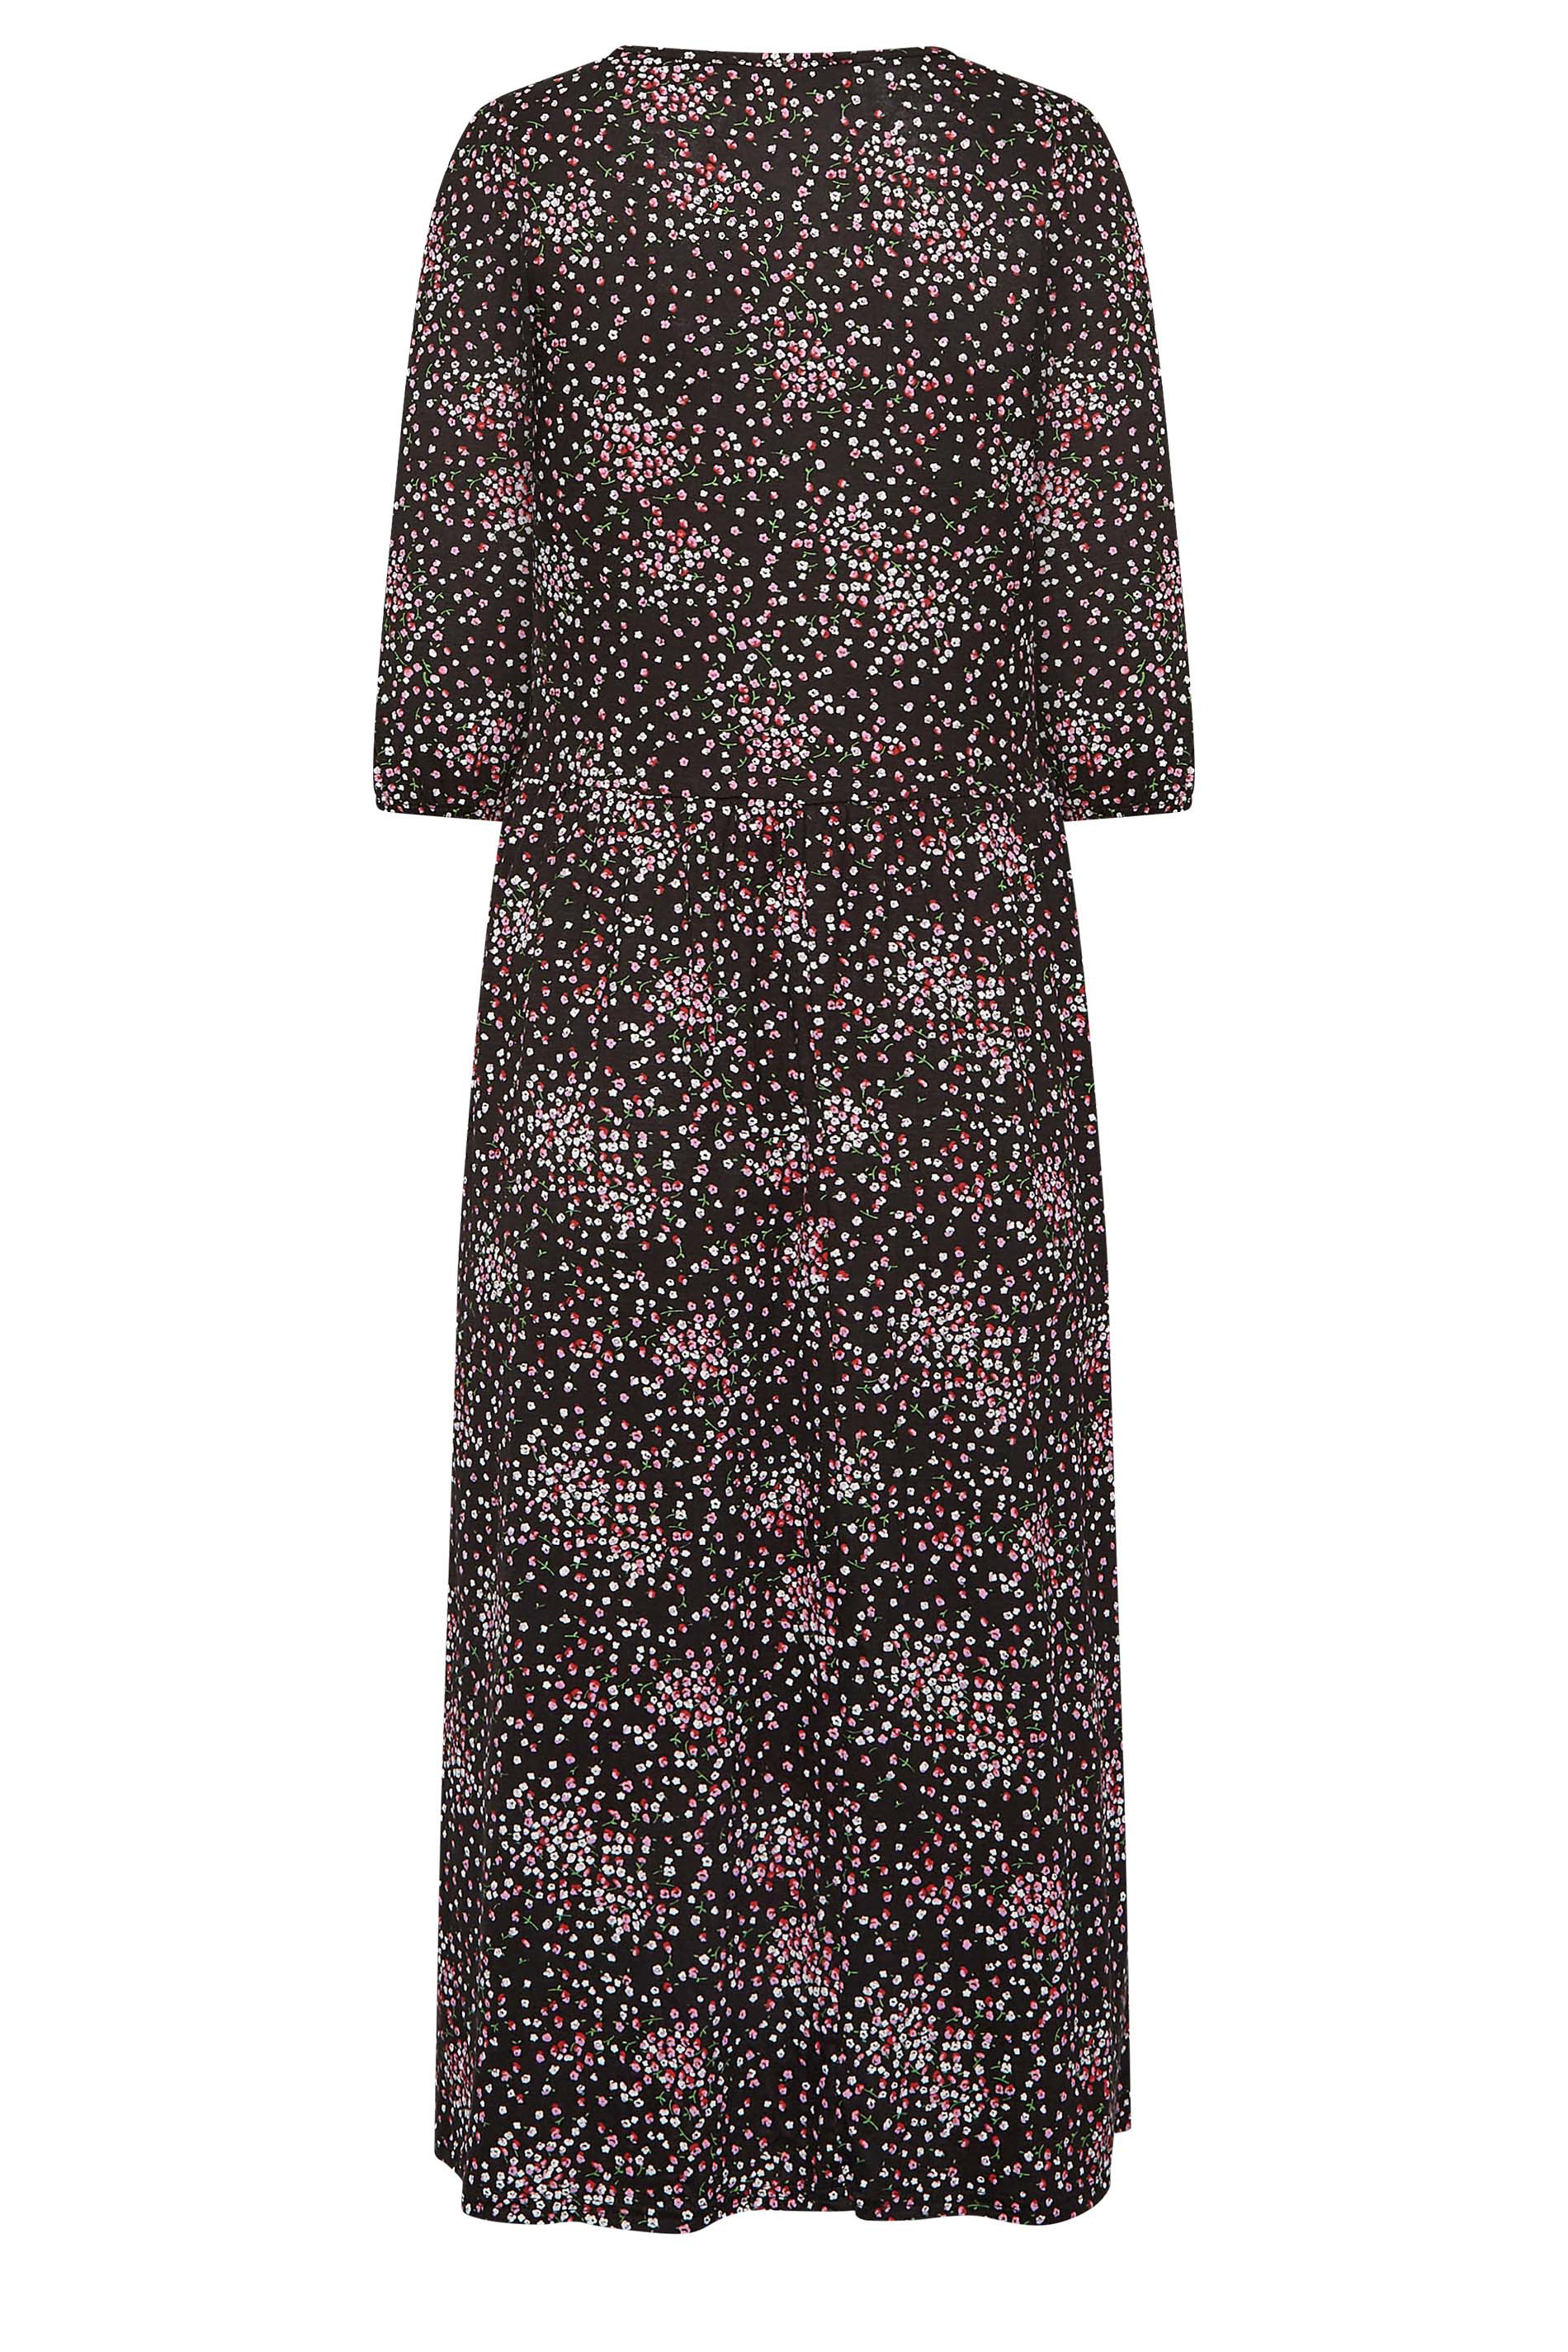 YOURS PETITE Plus Size Black & Pink Ditsy Print Midaxi Dress | Yours Clothing 2